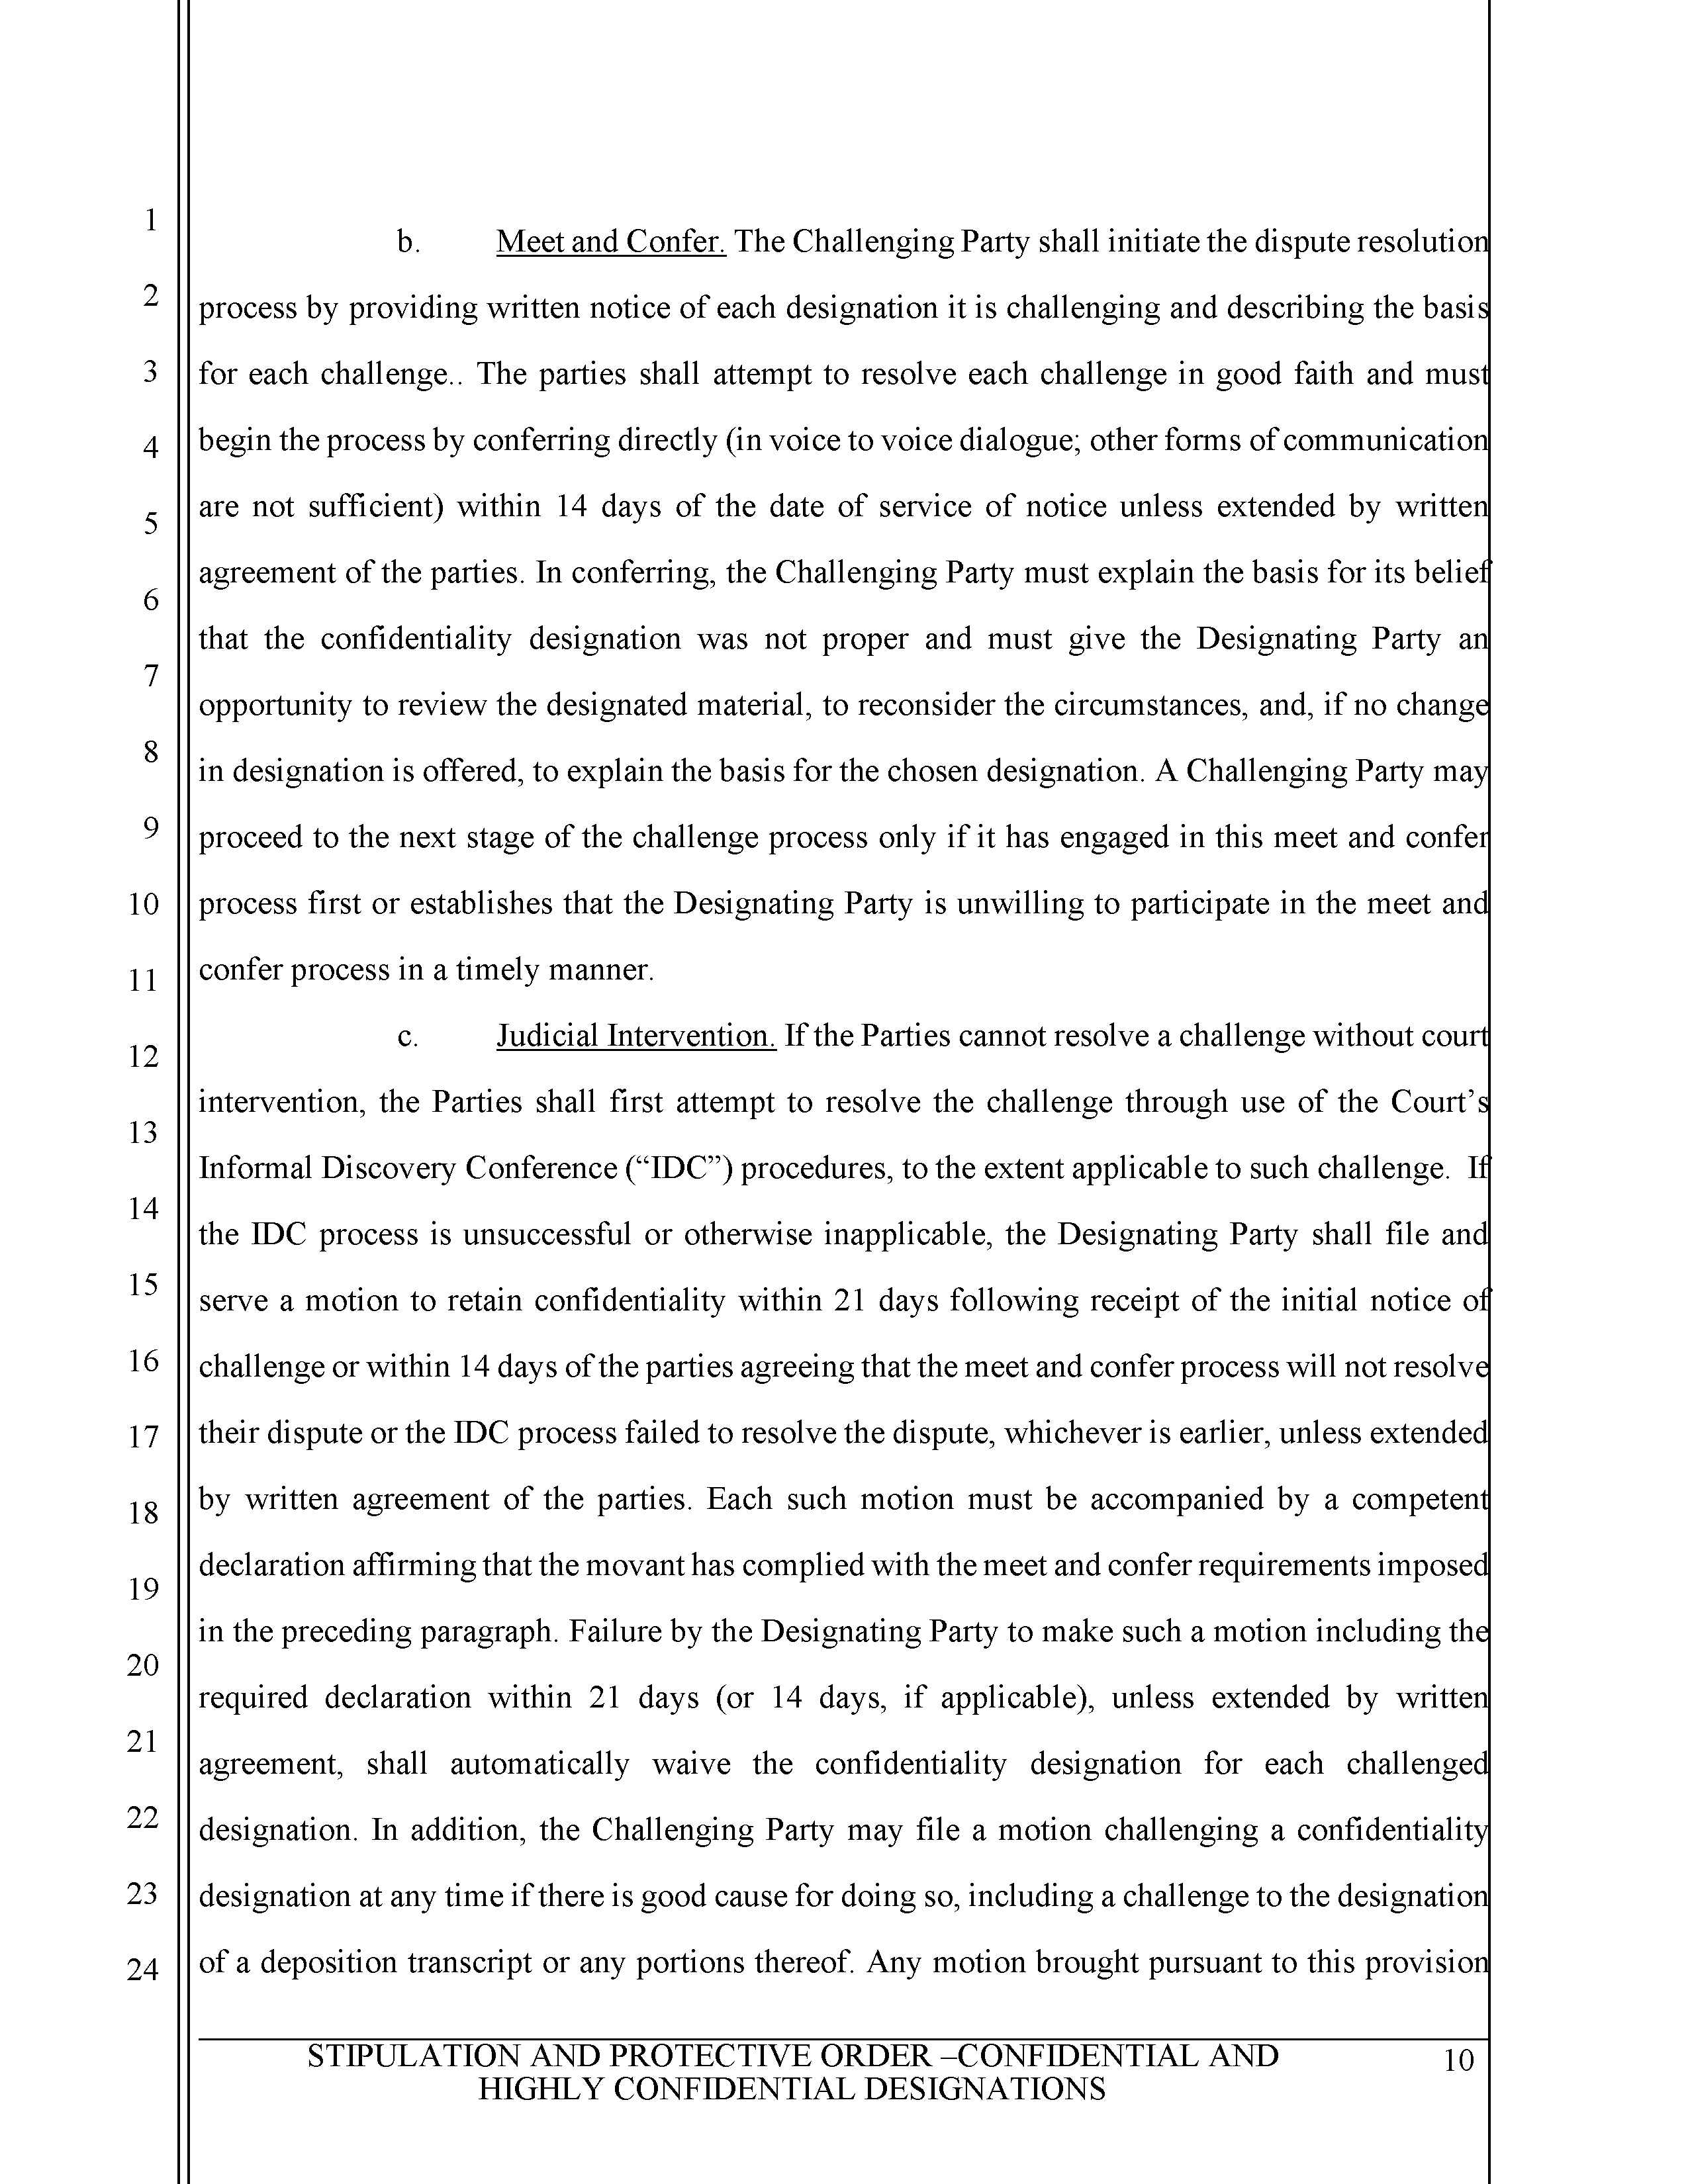 Protective Order Page 10